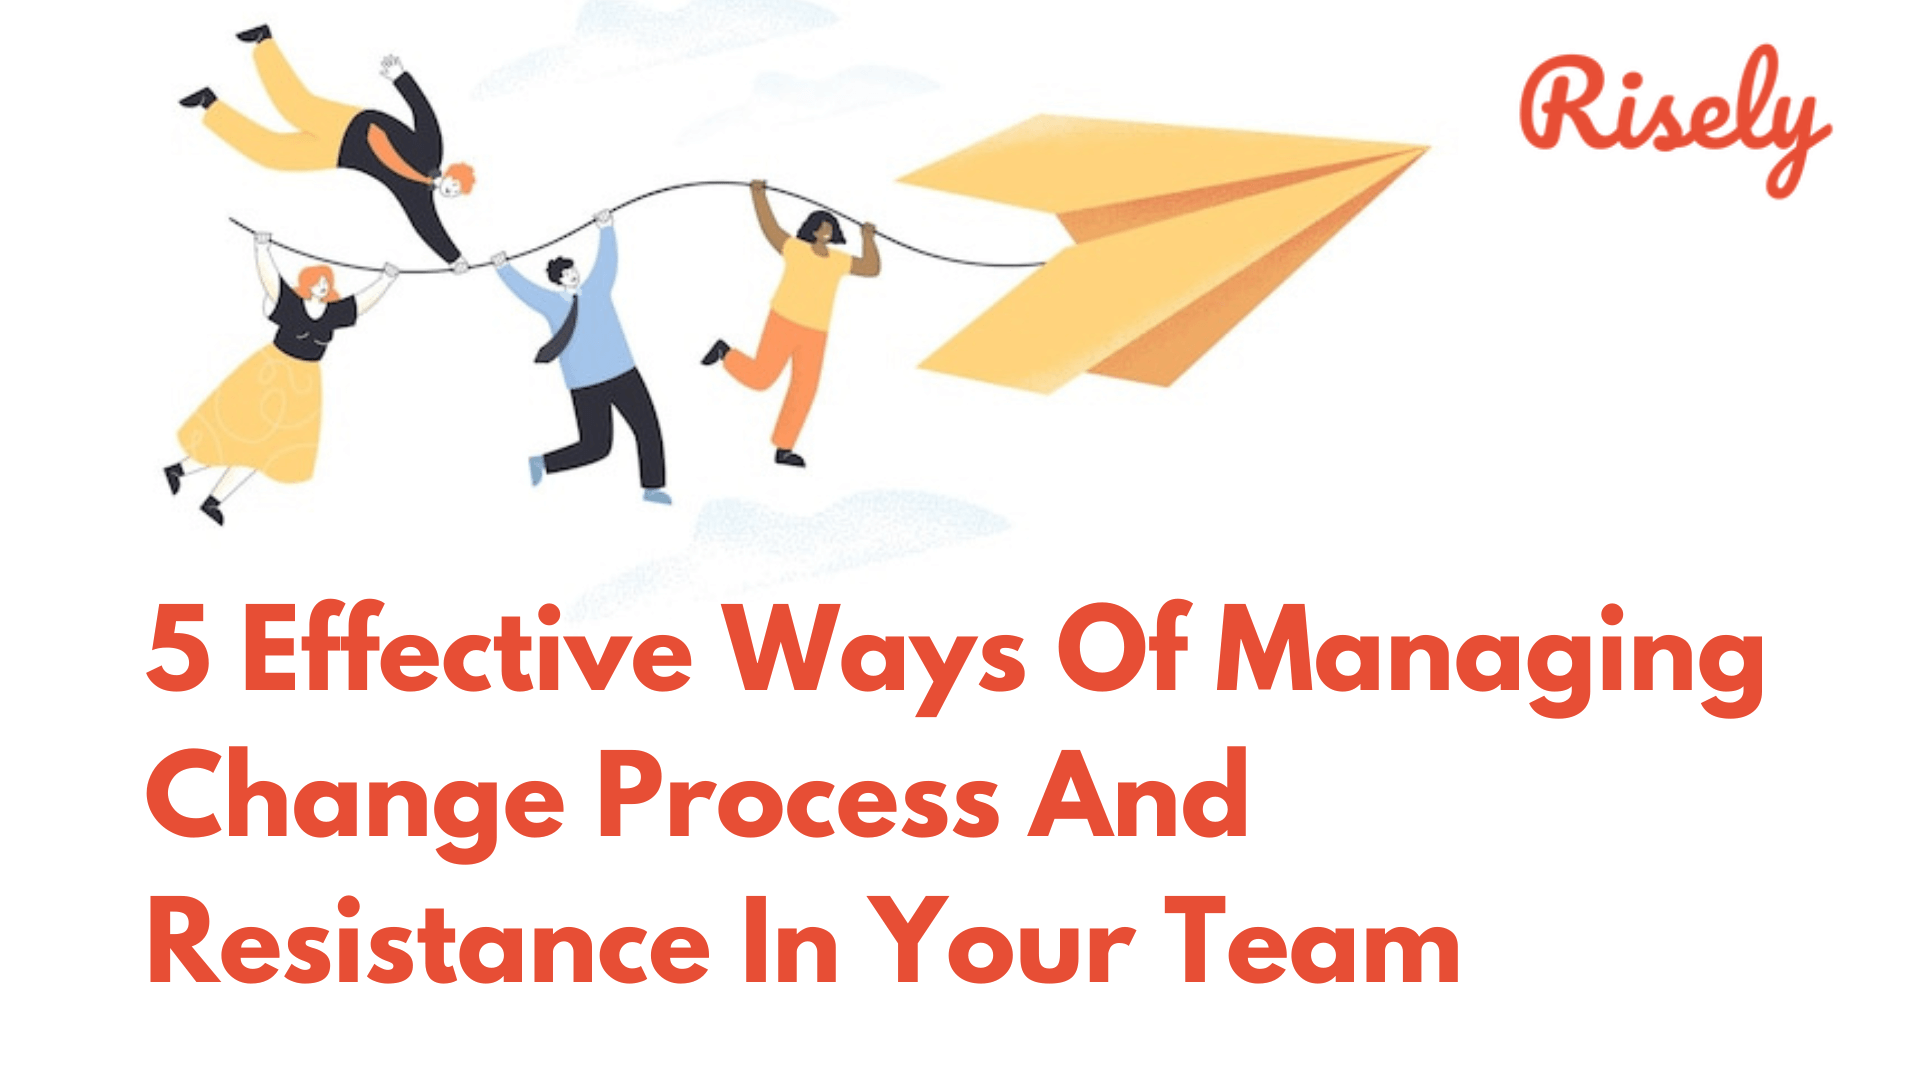 5 Effective Ways Of Managing Change Process And Resistance In Your Team